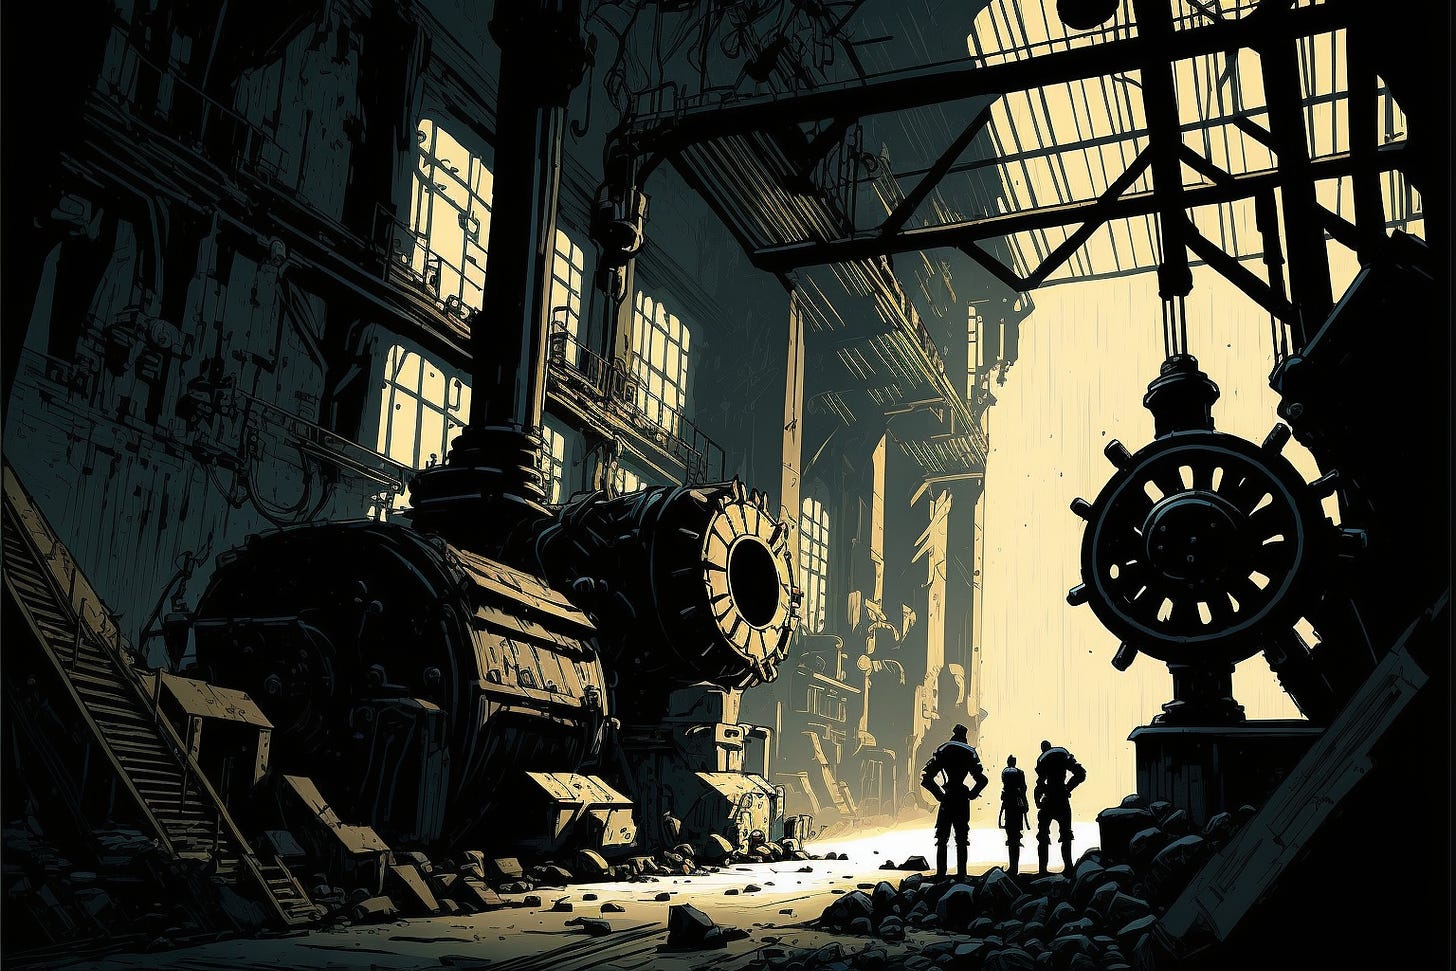 robots in a mechanical factory, graphic novel